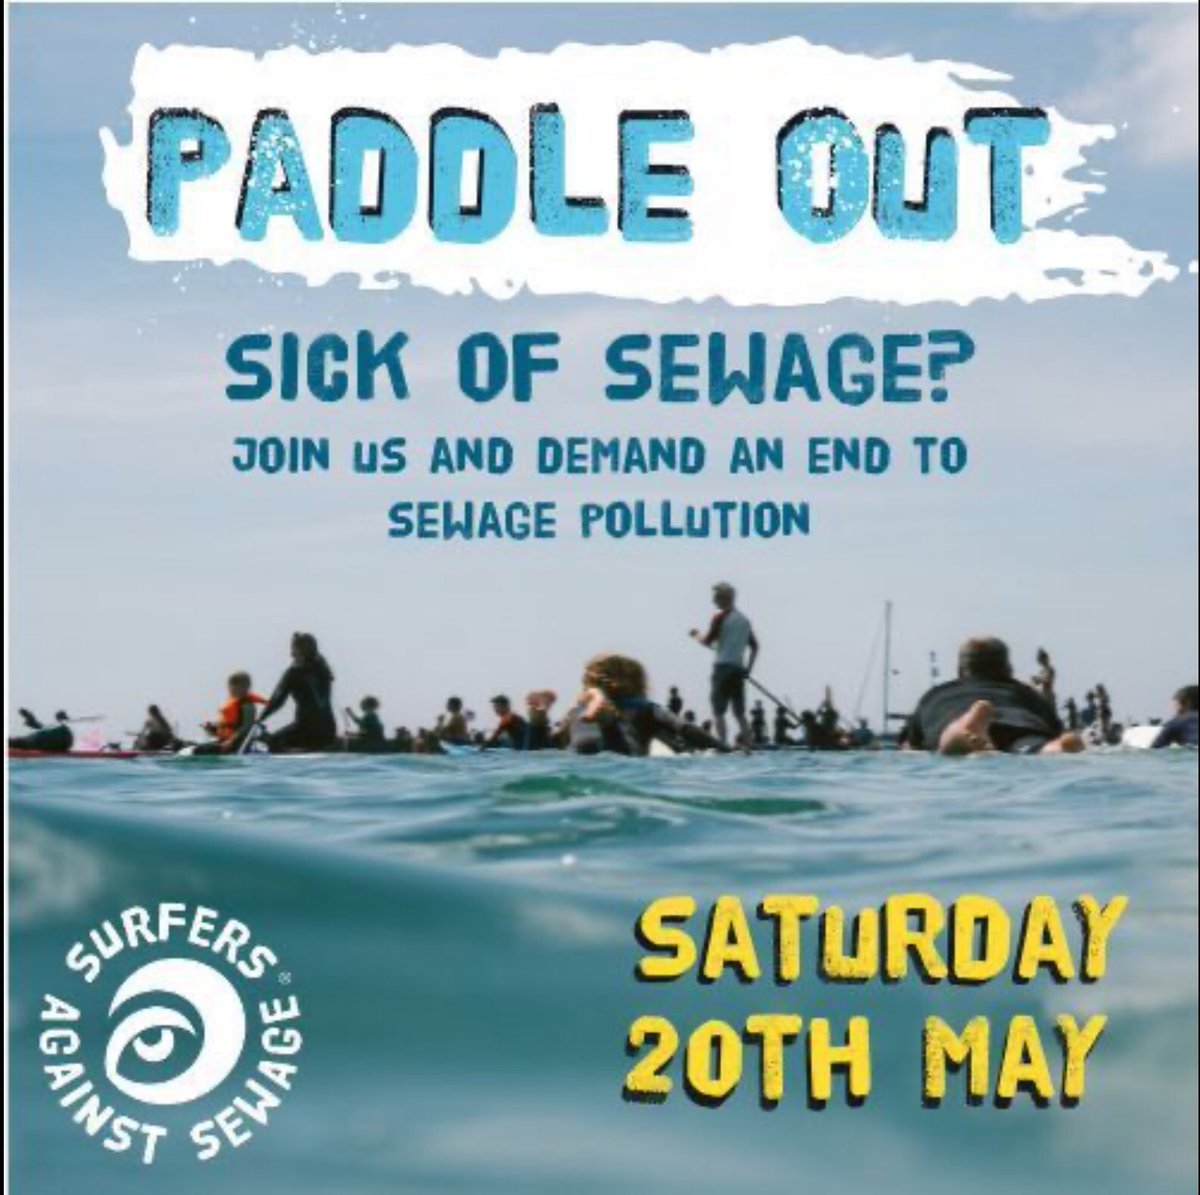 Just 3.5hrs to go, grab your swimming things, your board, your kayak, your SUP, your raft, whatever it is that you use to enjoy the wellbeing of water & head to Gylly Beach, Falmouth to join today’s @sascampaigns #paddleoutprotest against the #SewageScandal 

See you there!